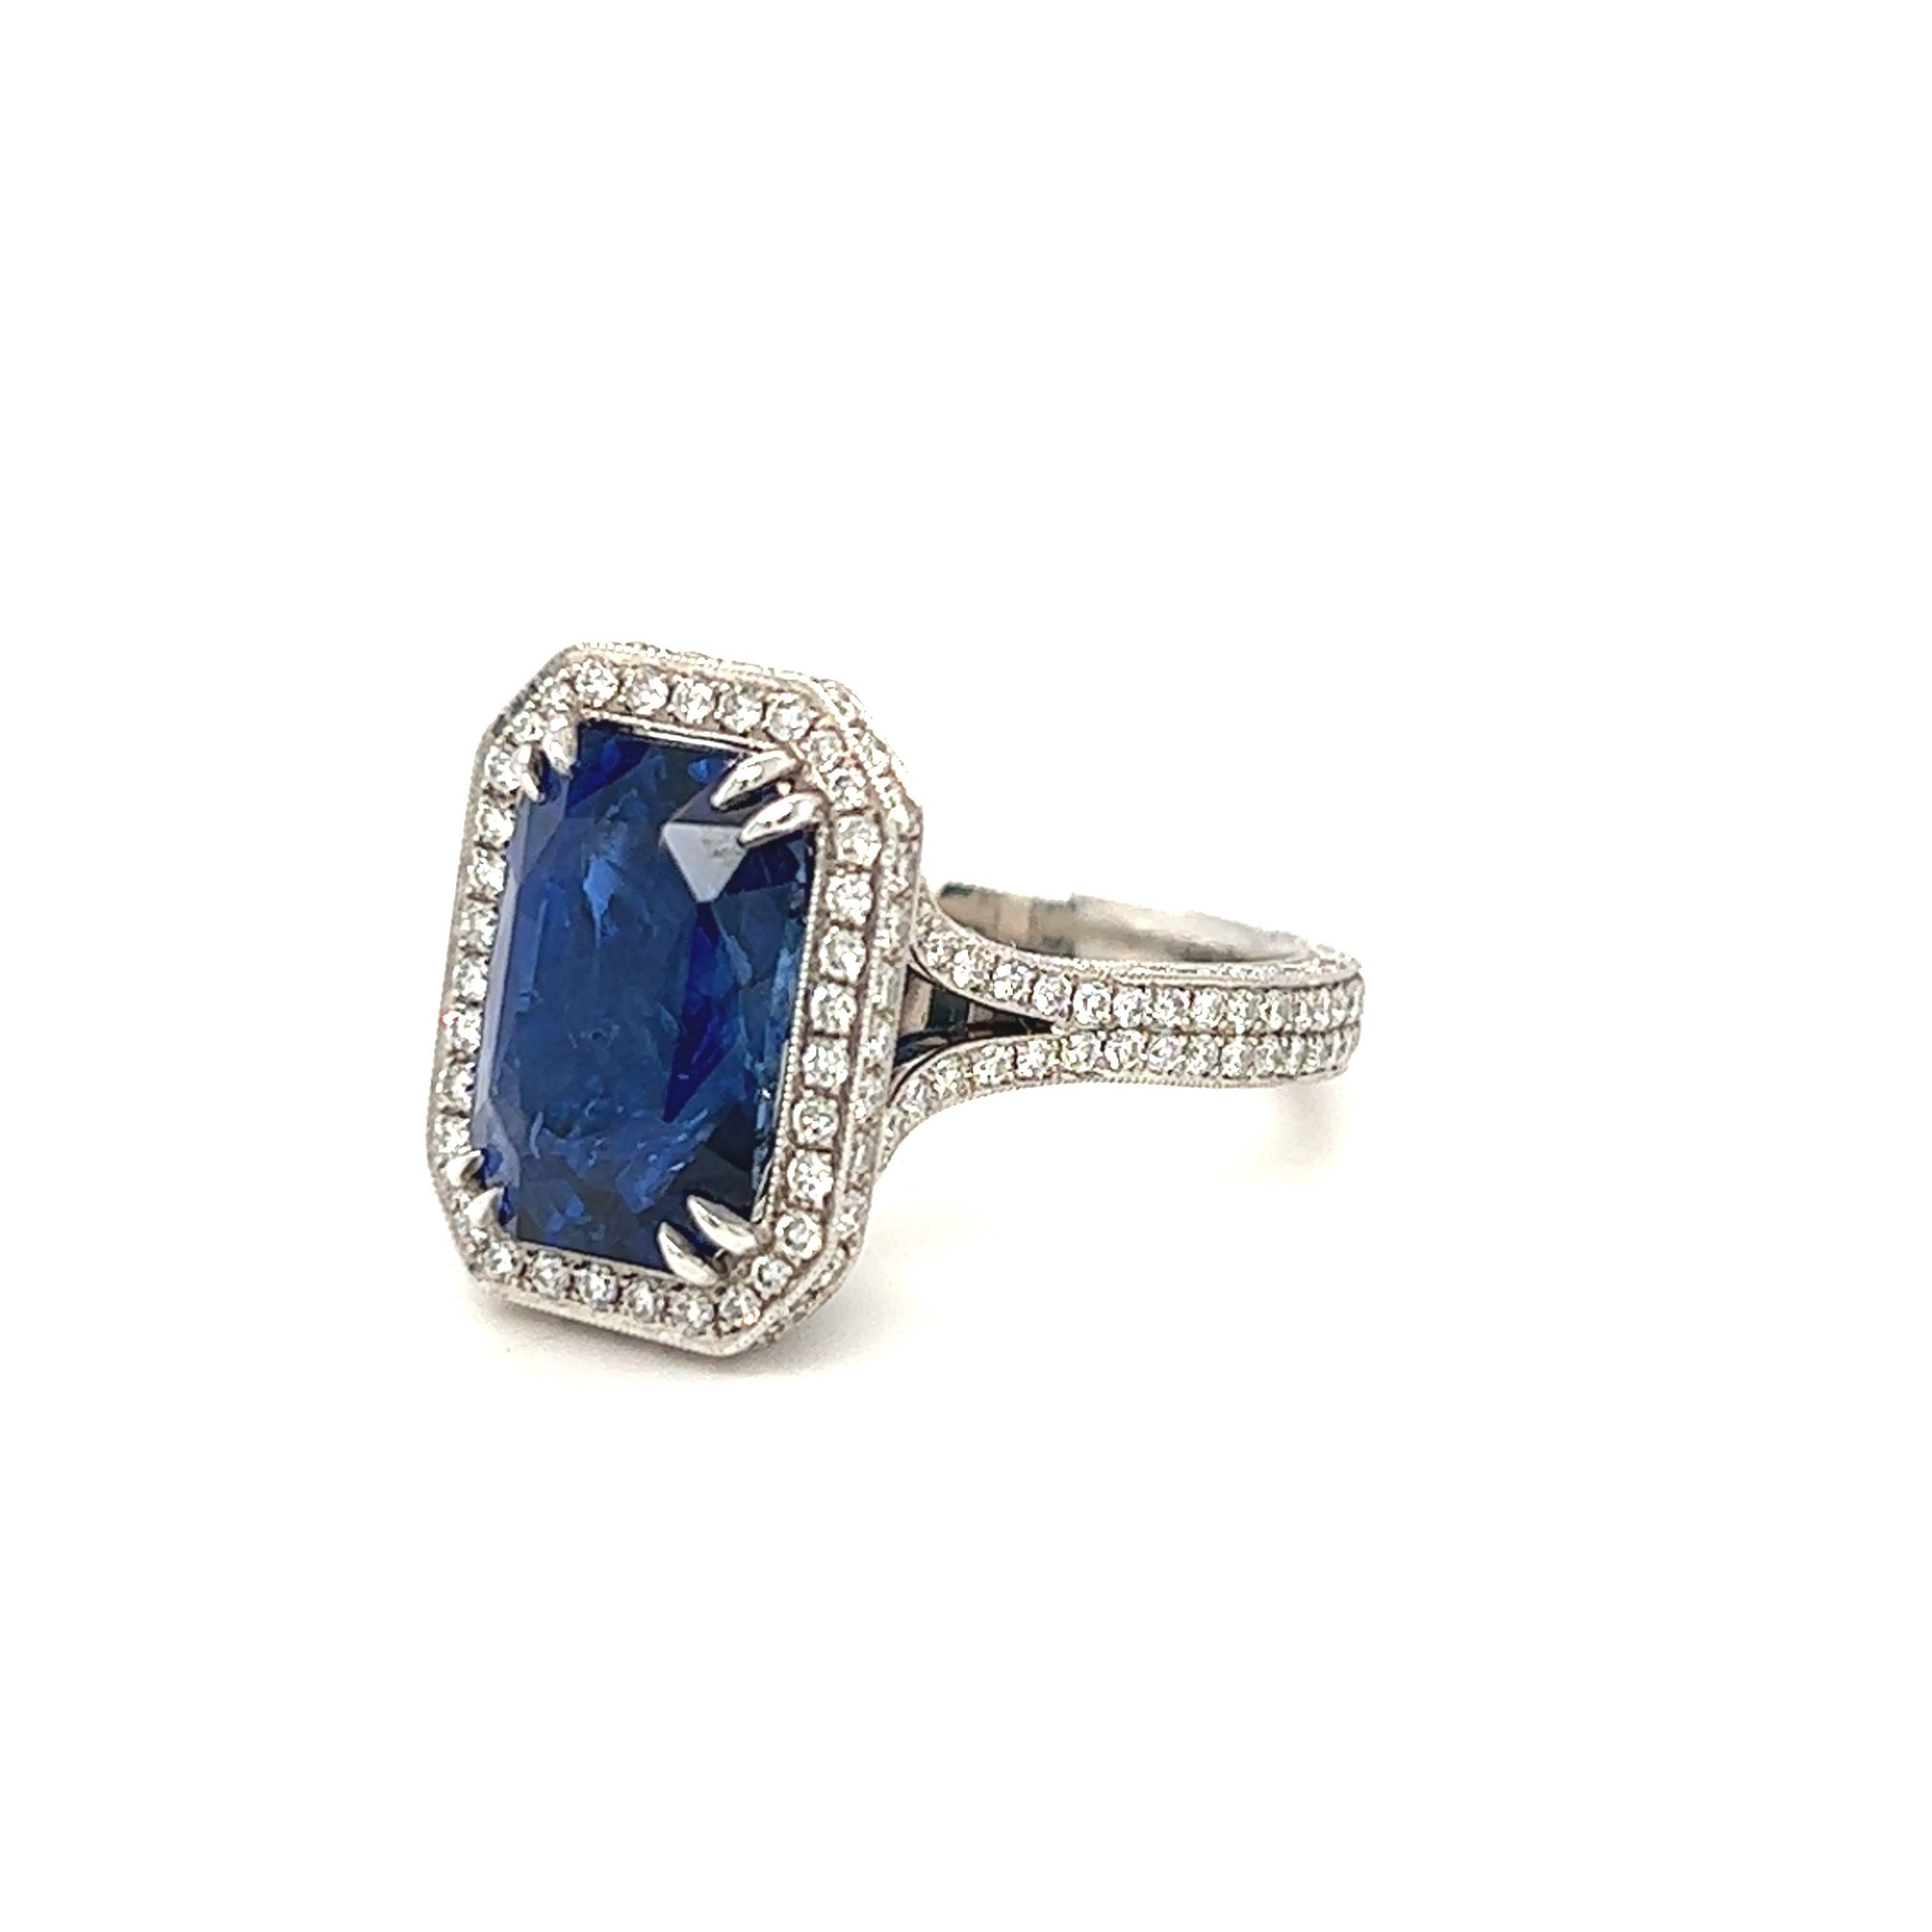 Designed and handcrafted by our team at Gems Are Forever, Beverly Hills. Our proud creation is this art deco inspired sapphire and diamond convertible ring and pendant. A deep royal blue sapphire 8.14 carat step cut Ceylon sapphire is front and